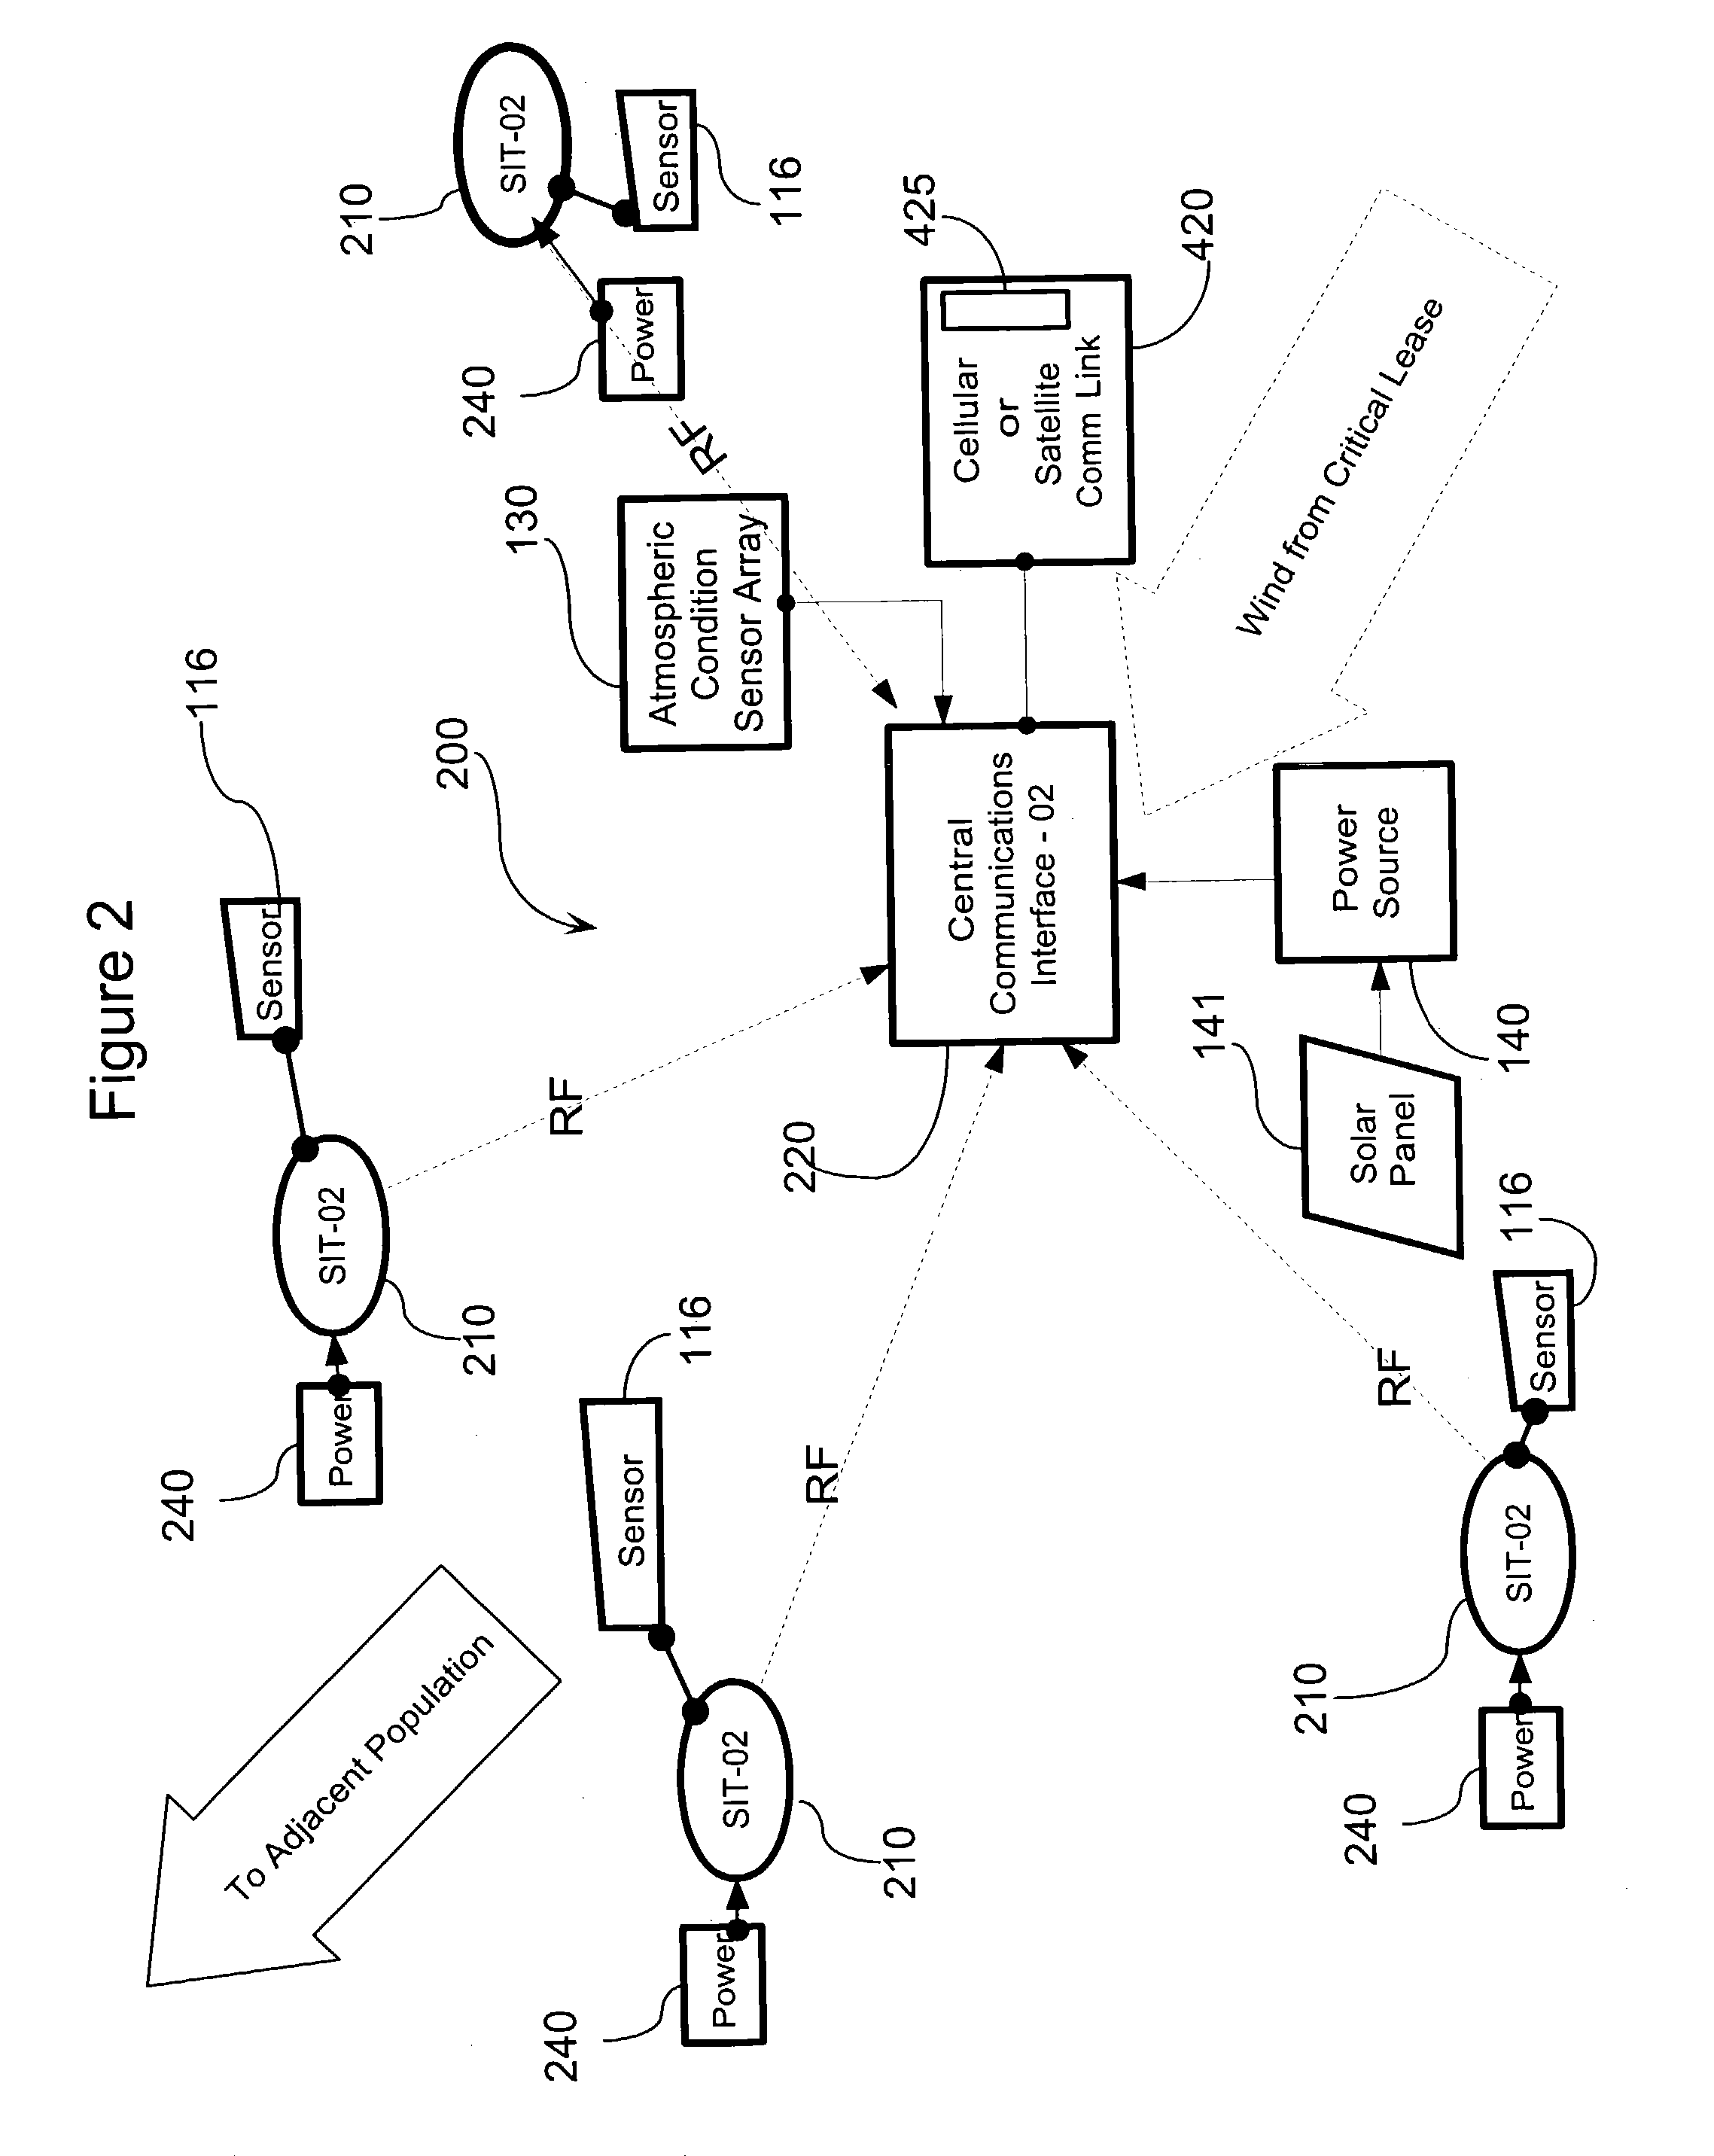 Apparatus system and method for gas well site monitoring